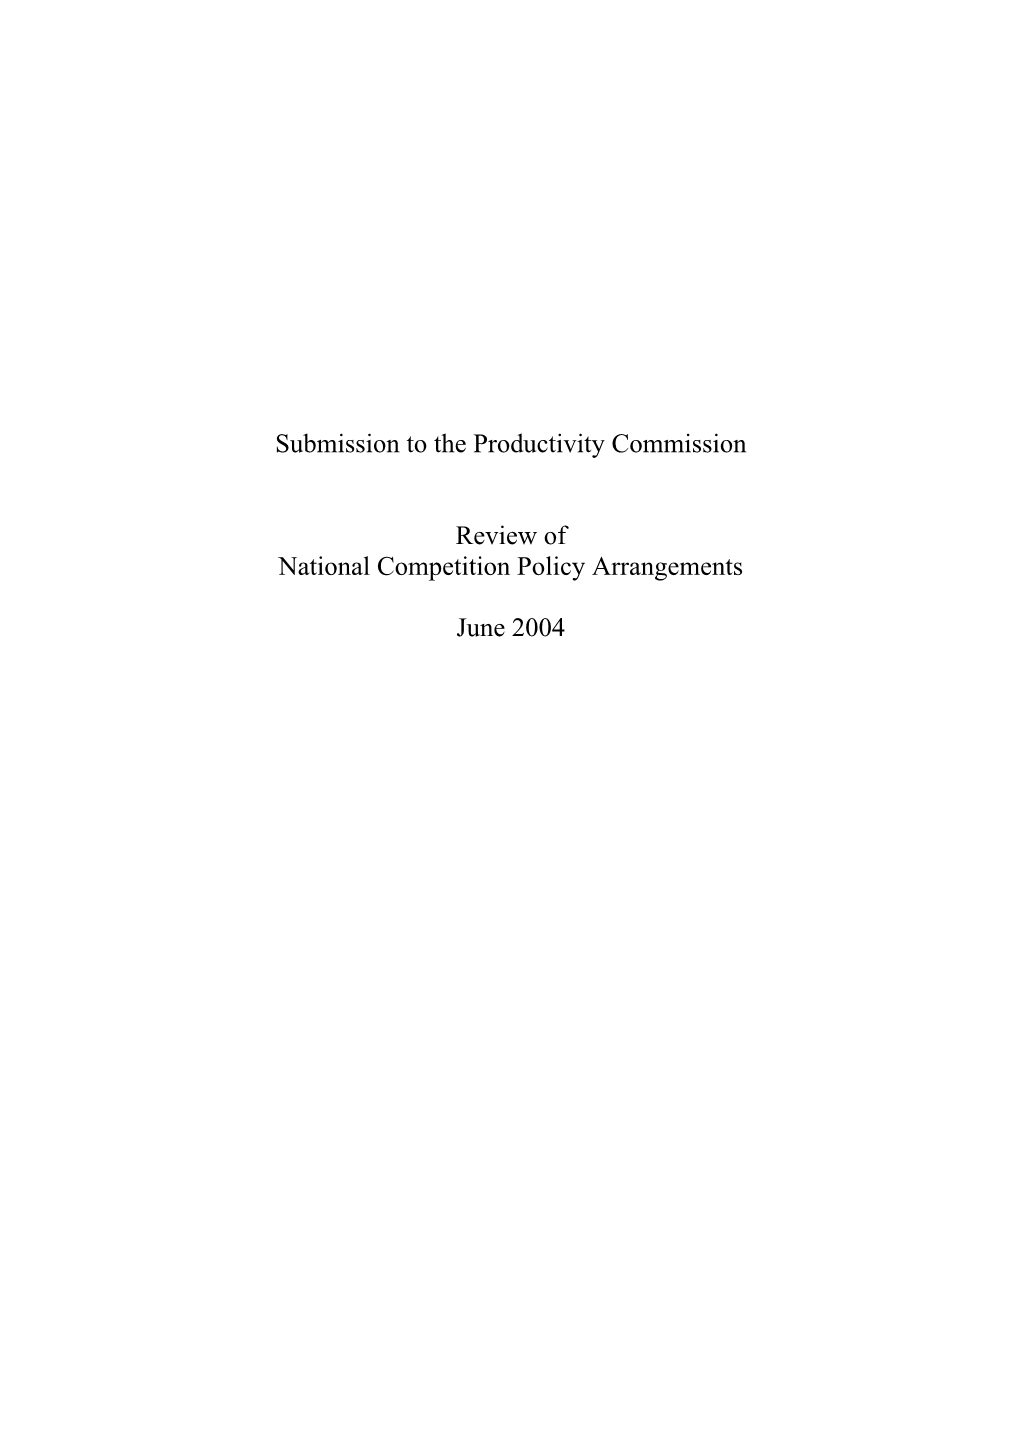 Submission to the Productivity Commission Review of National Competition Policy Arrangements June 2004